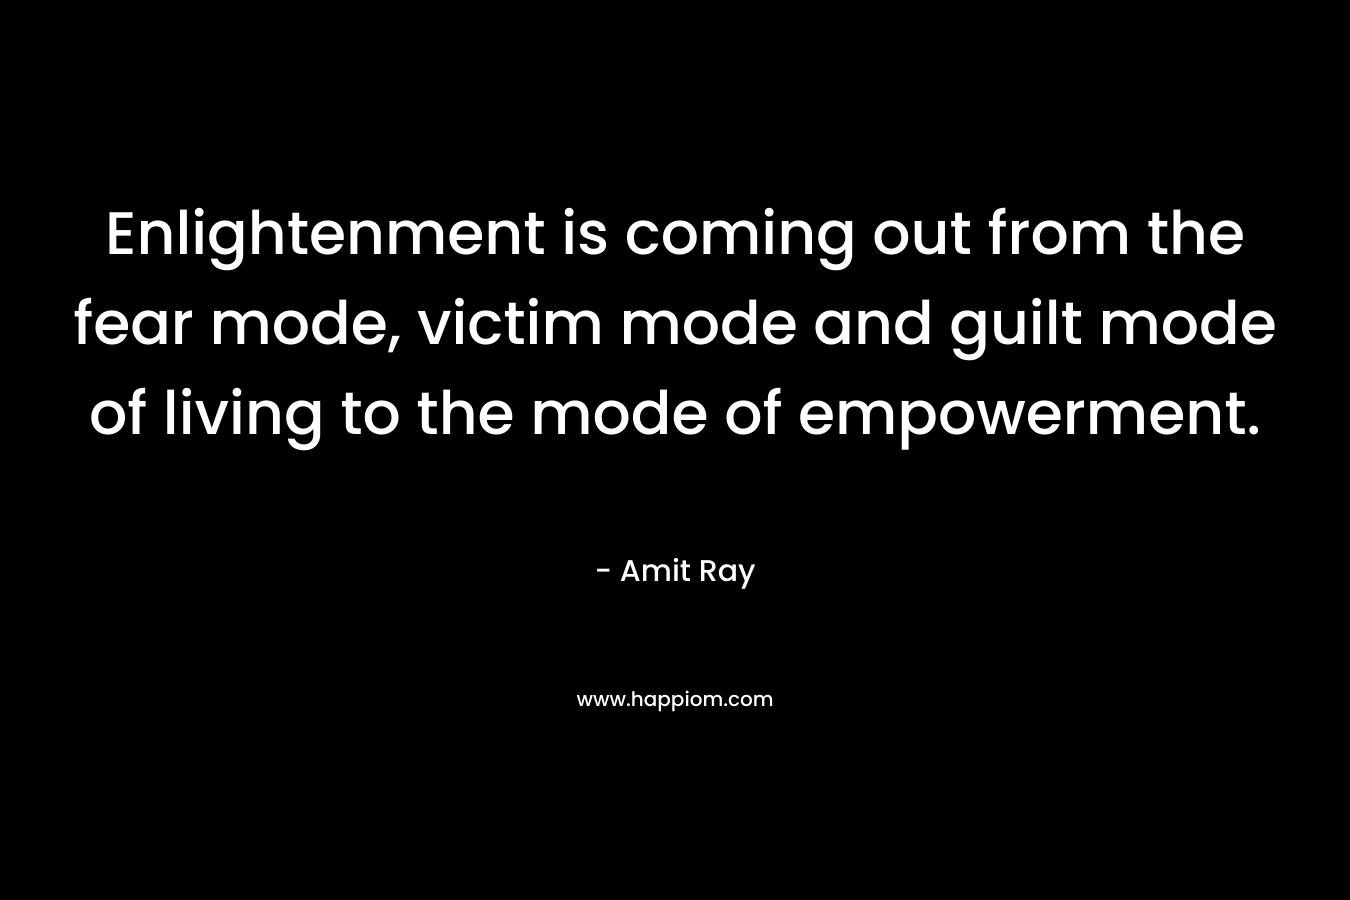 Enlightenment is coming out from the fear mode, victim mode and guilt mode of living to the mode of empowerment. – Amit Ray